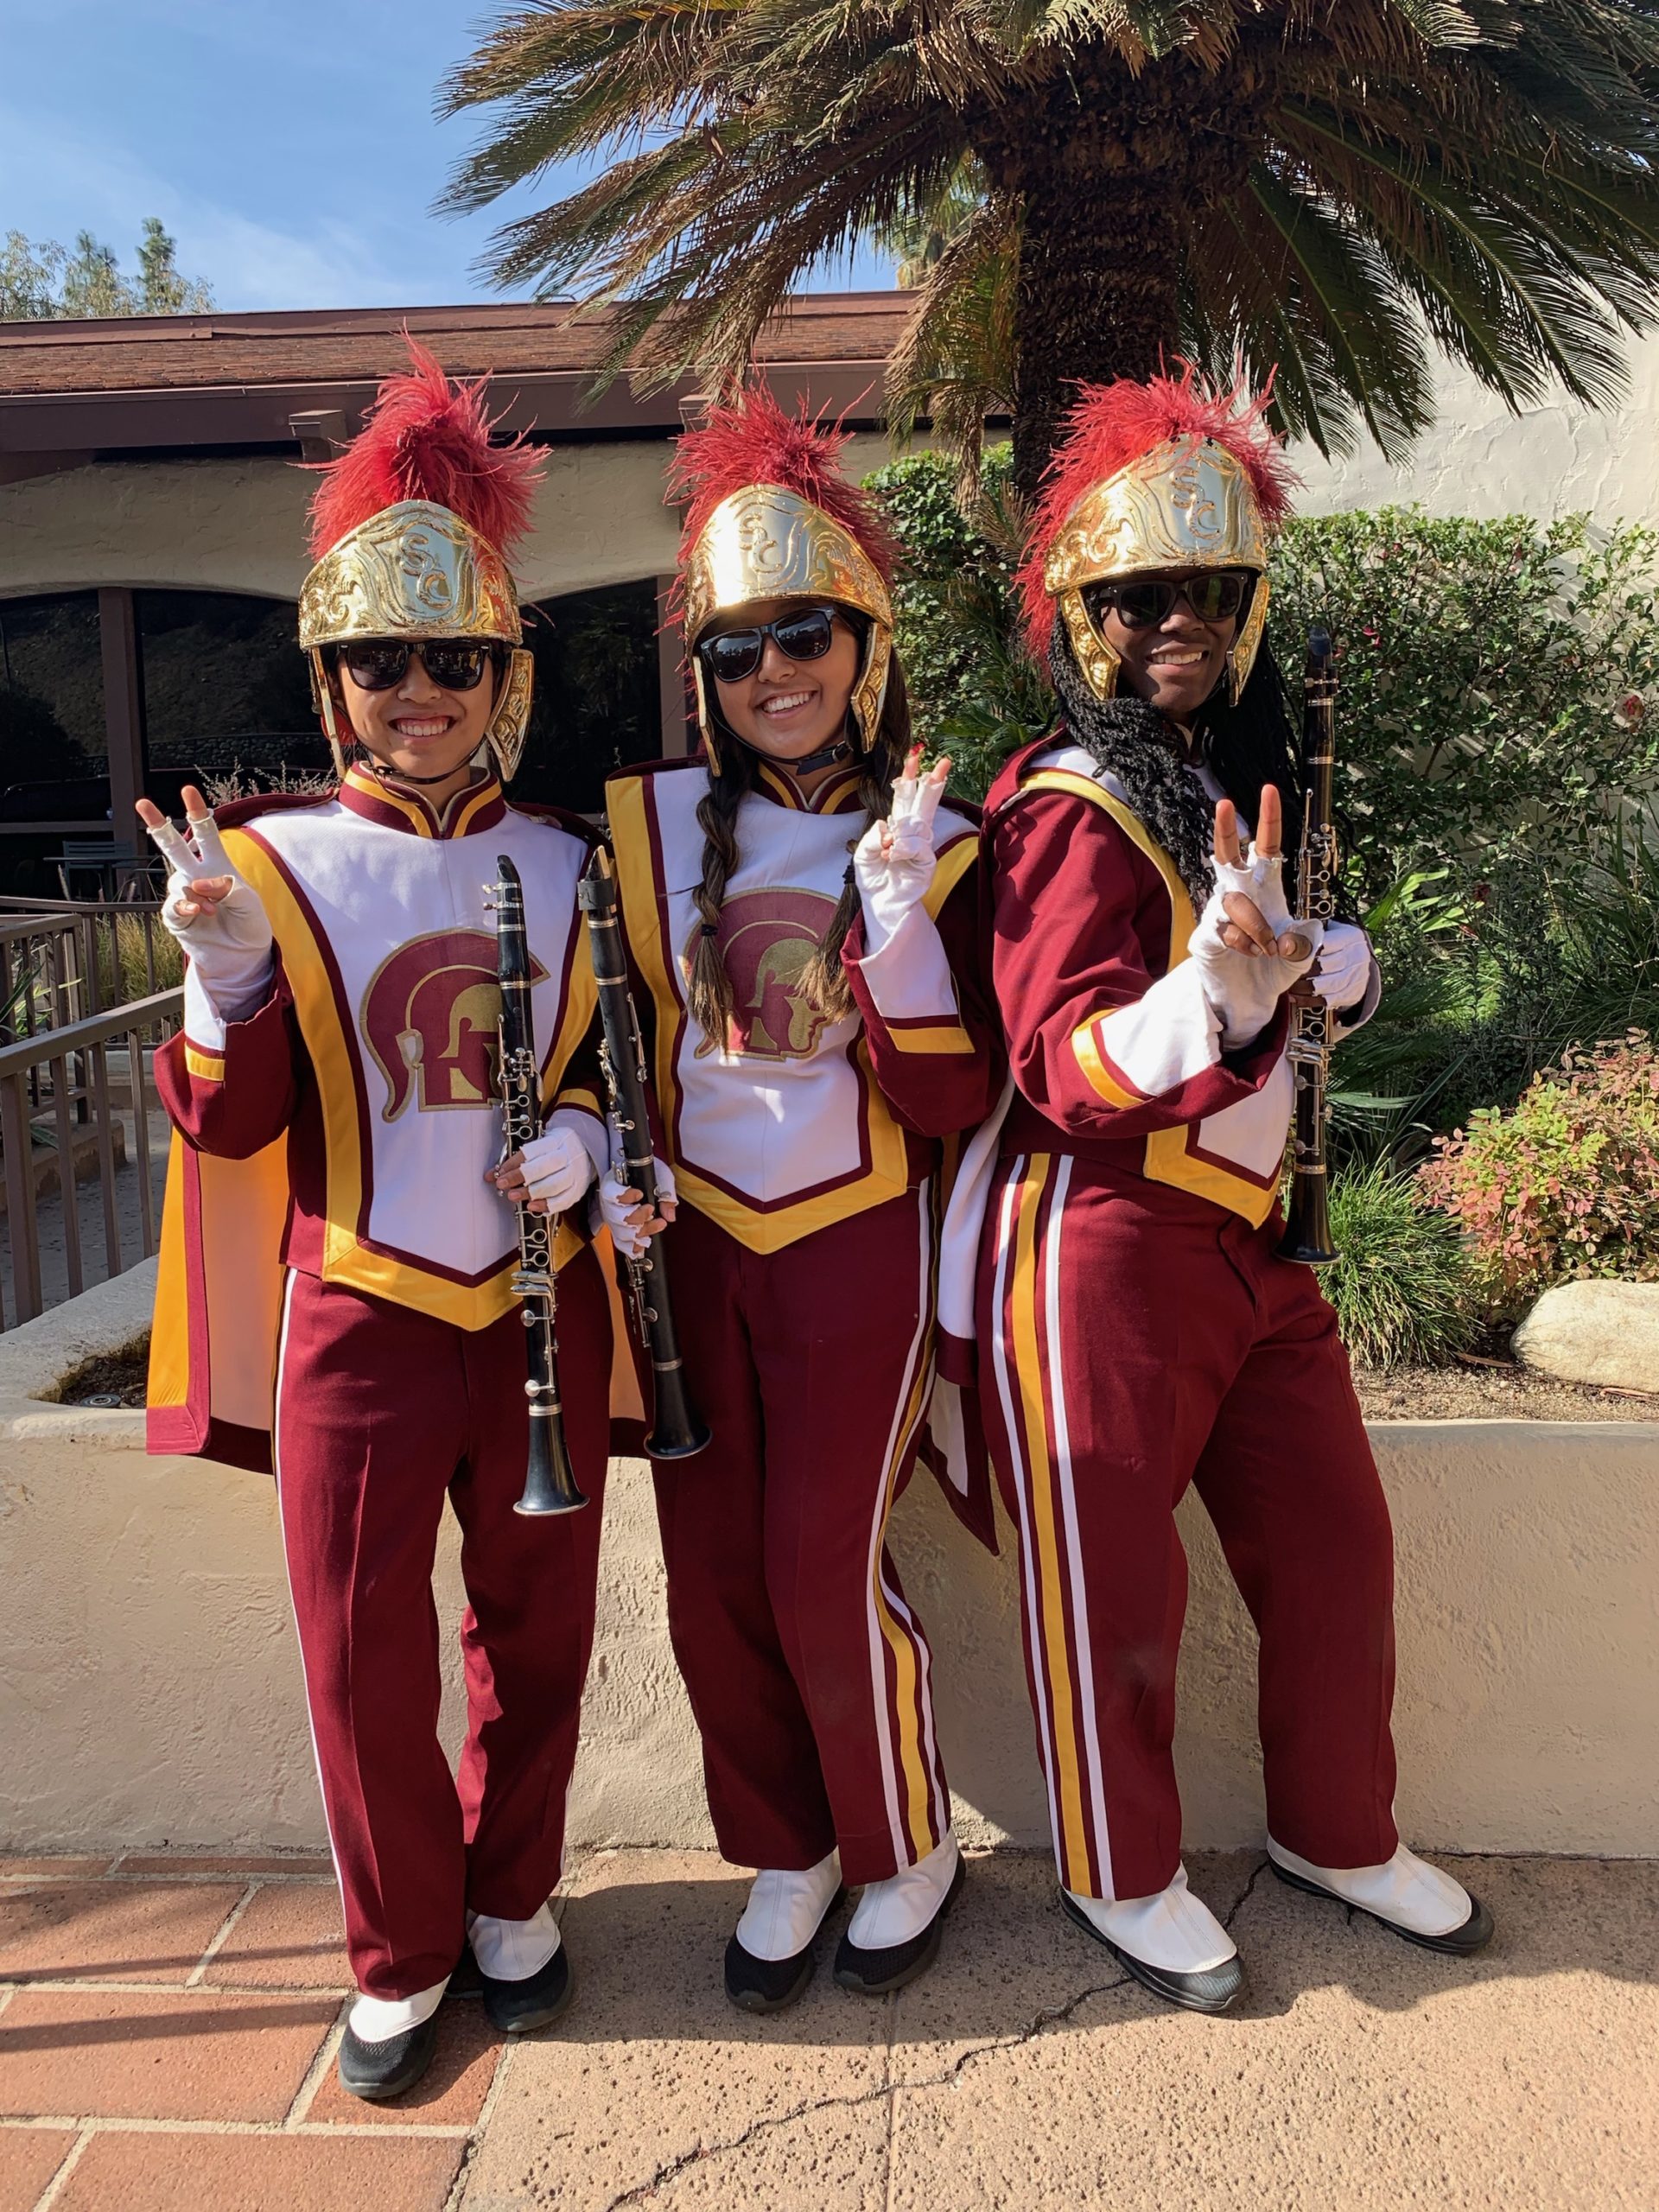 Three students in maroon & gold marching band attire, holding reed instruments